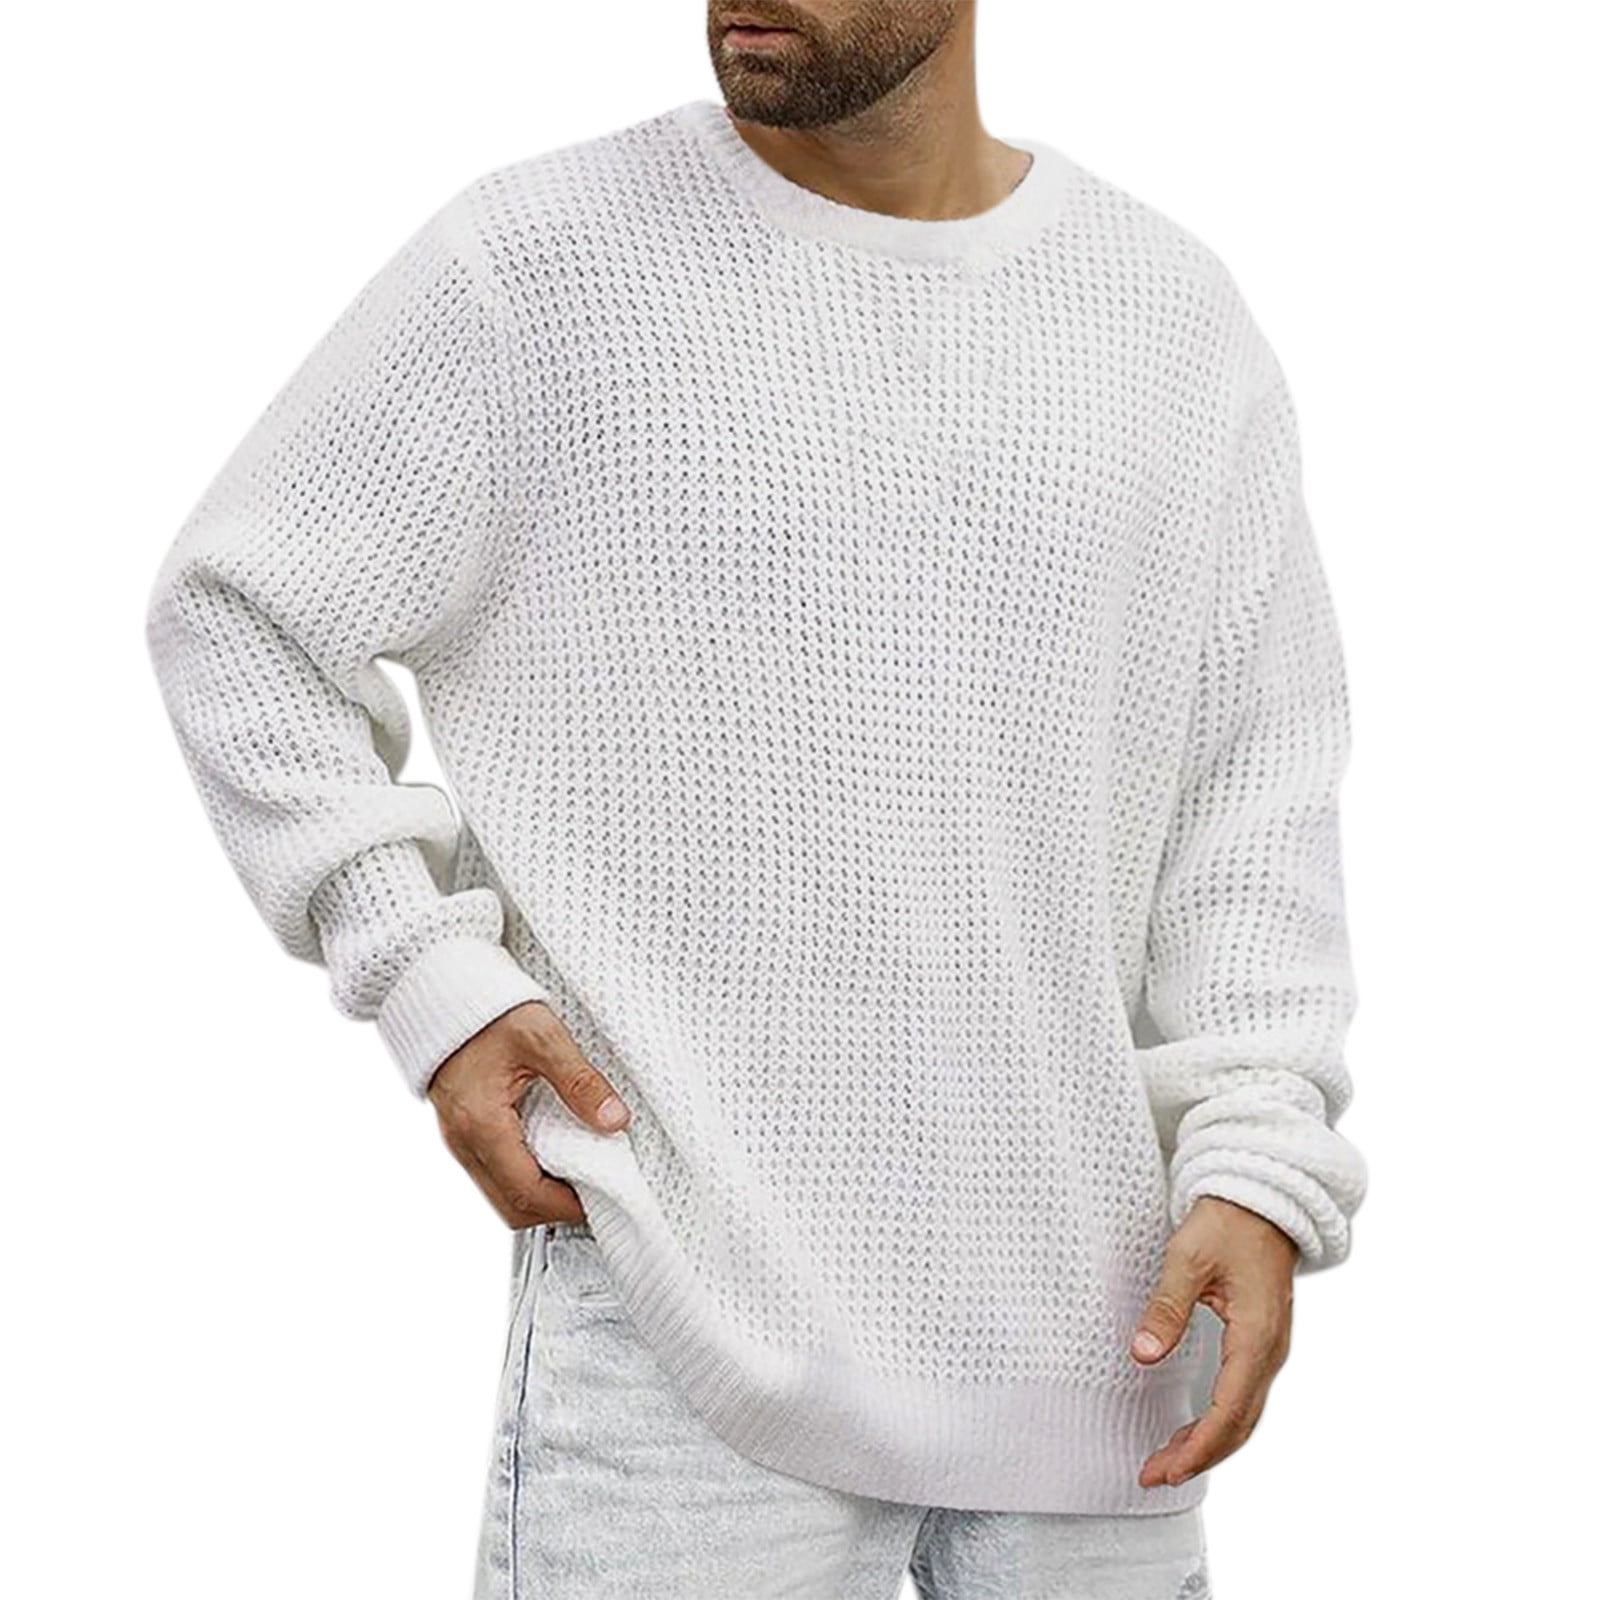 Fauean Mens Knit Sweater Crew Neck Casual Long Sleeves Lightweight ...